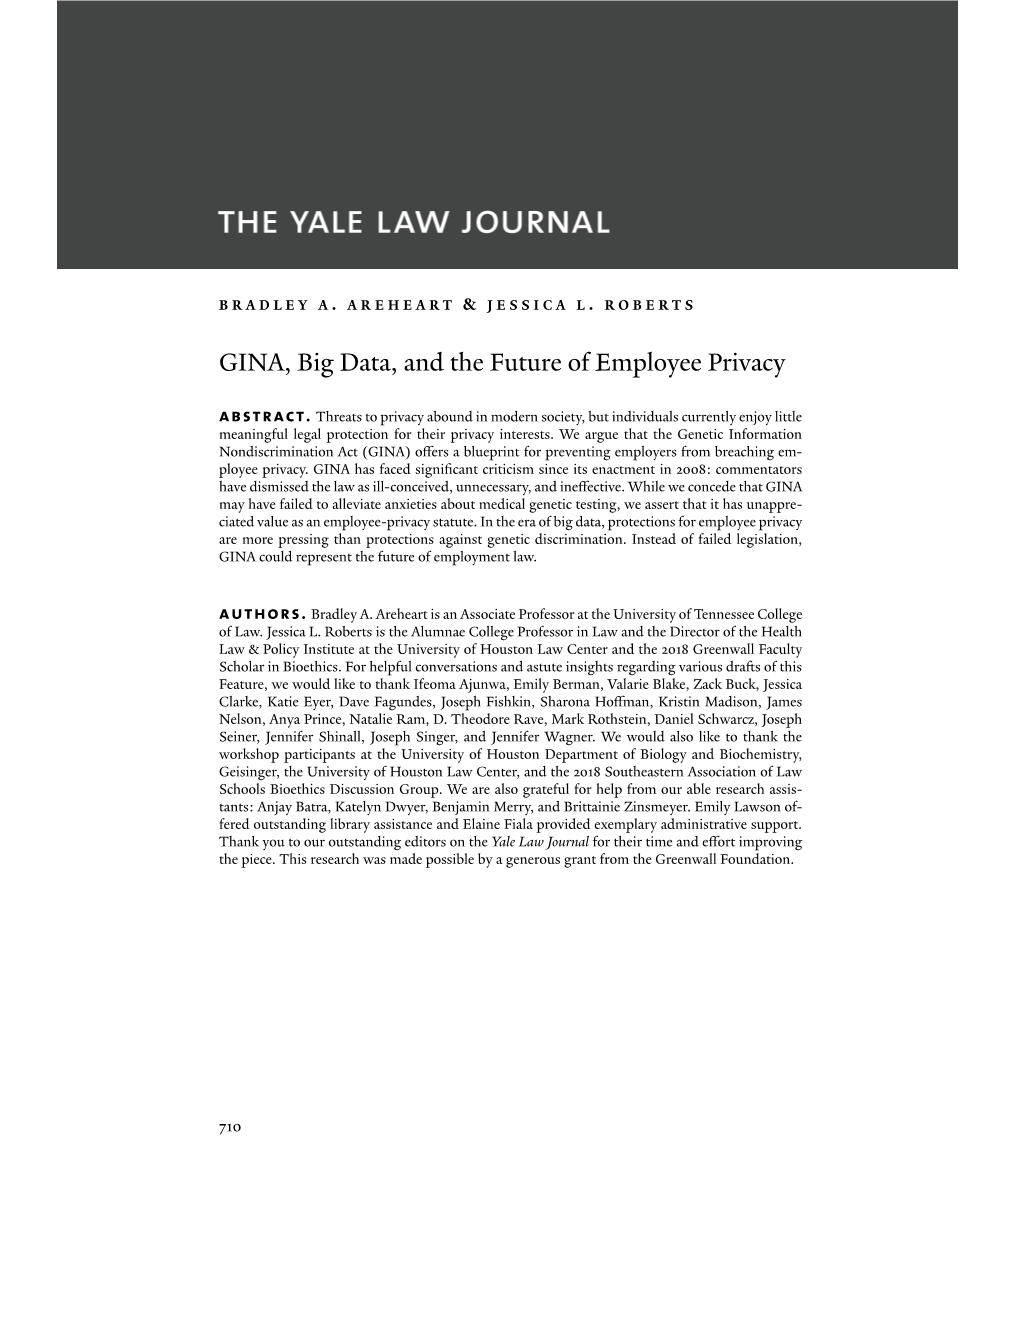 GINA, Big Data, and the Future of Employee Privacy Abstract